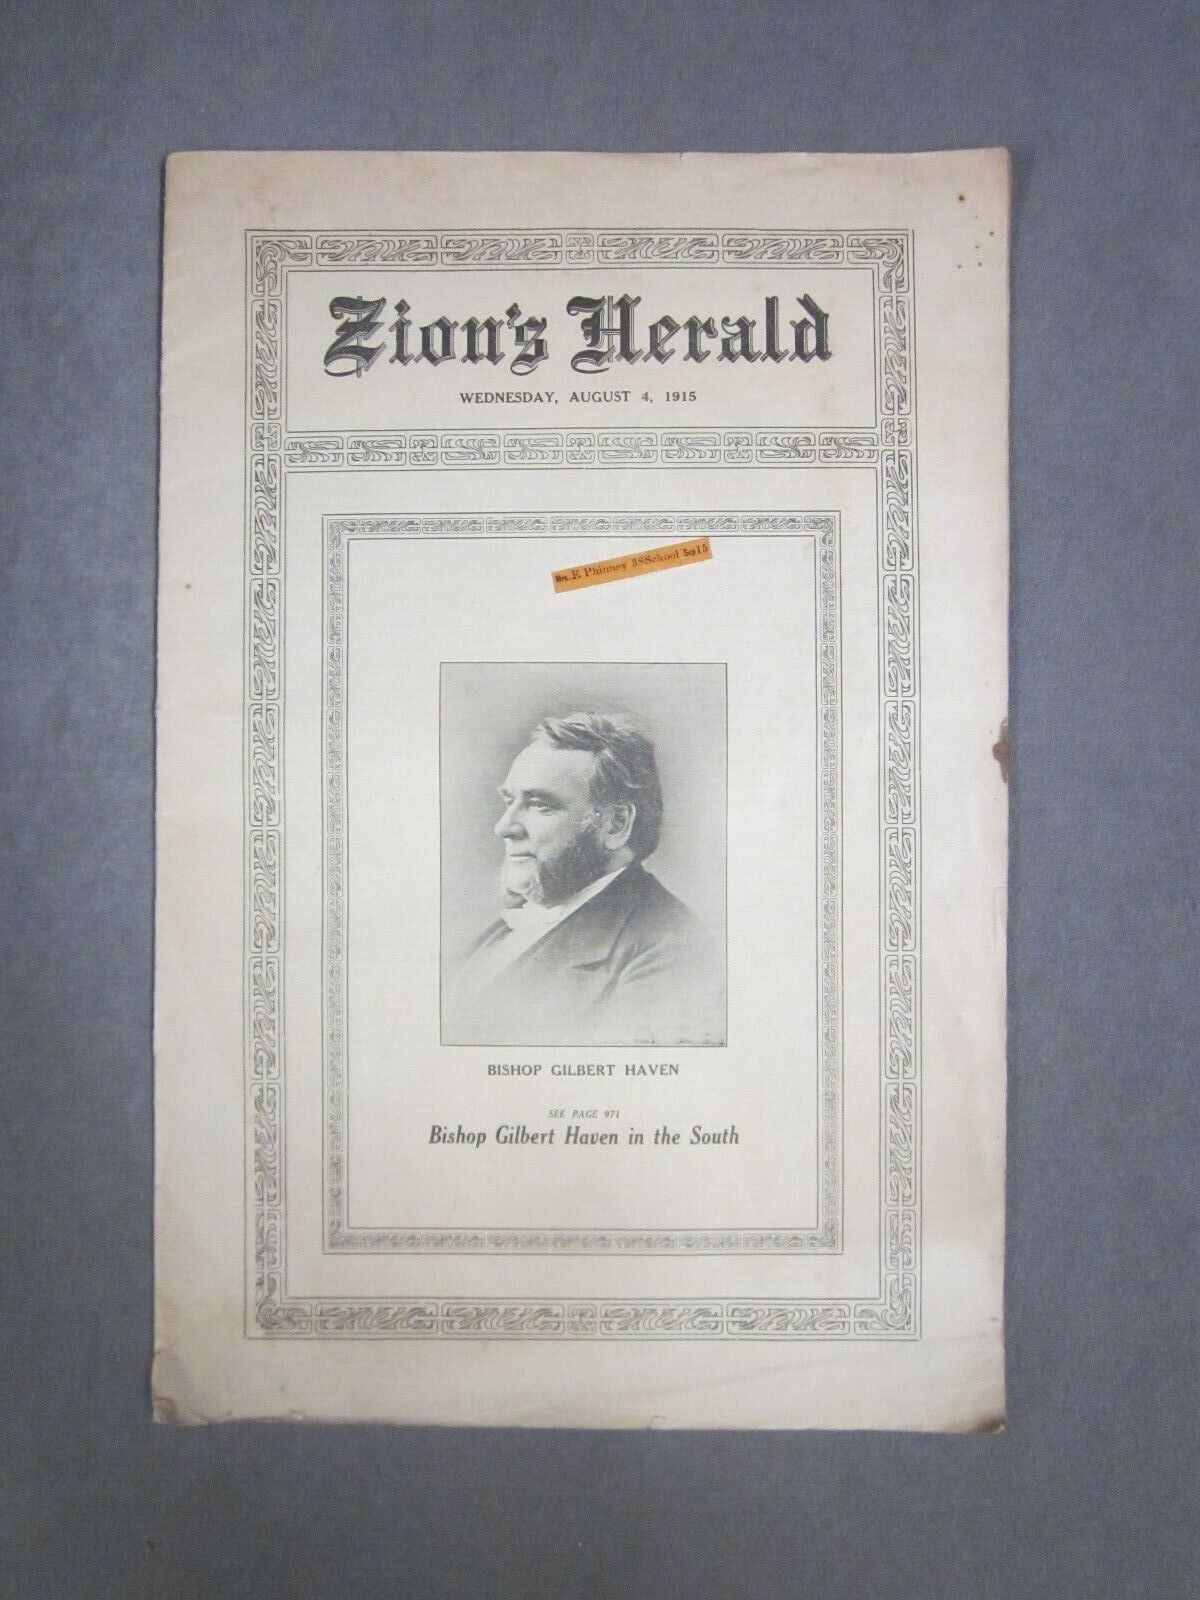 Methodist Newspaper   Zion's Herald   Weekly   Aug 4 1915   Published in Boston